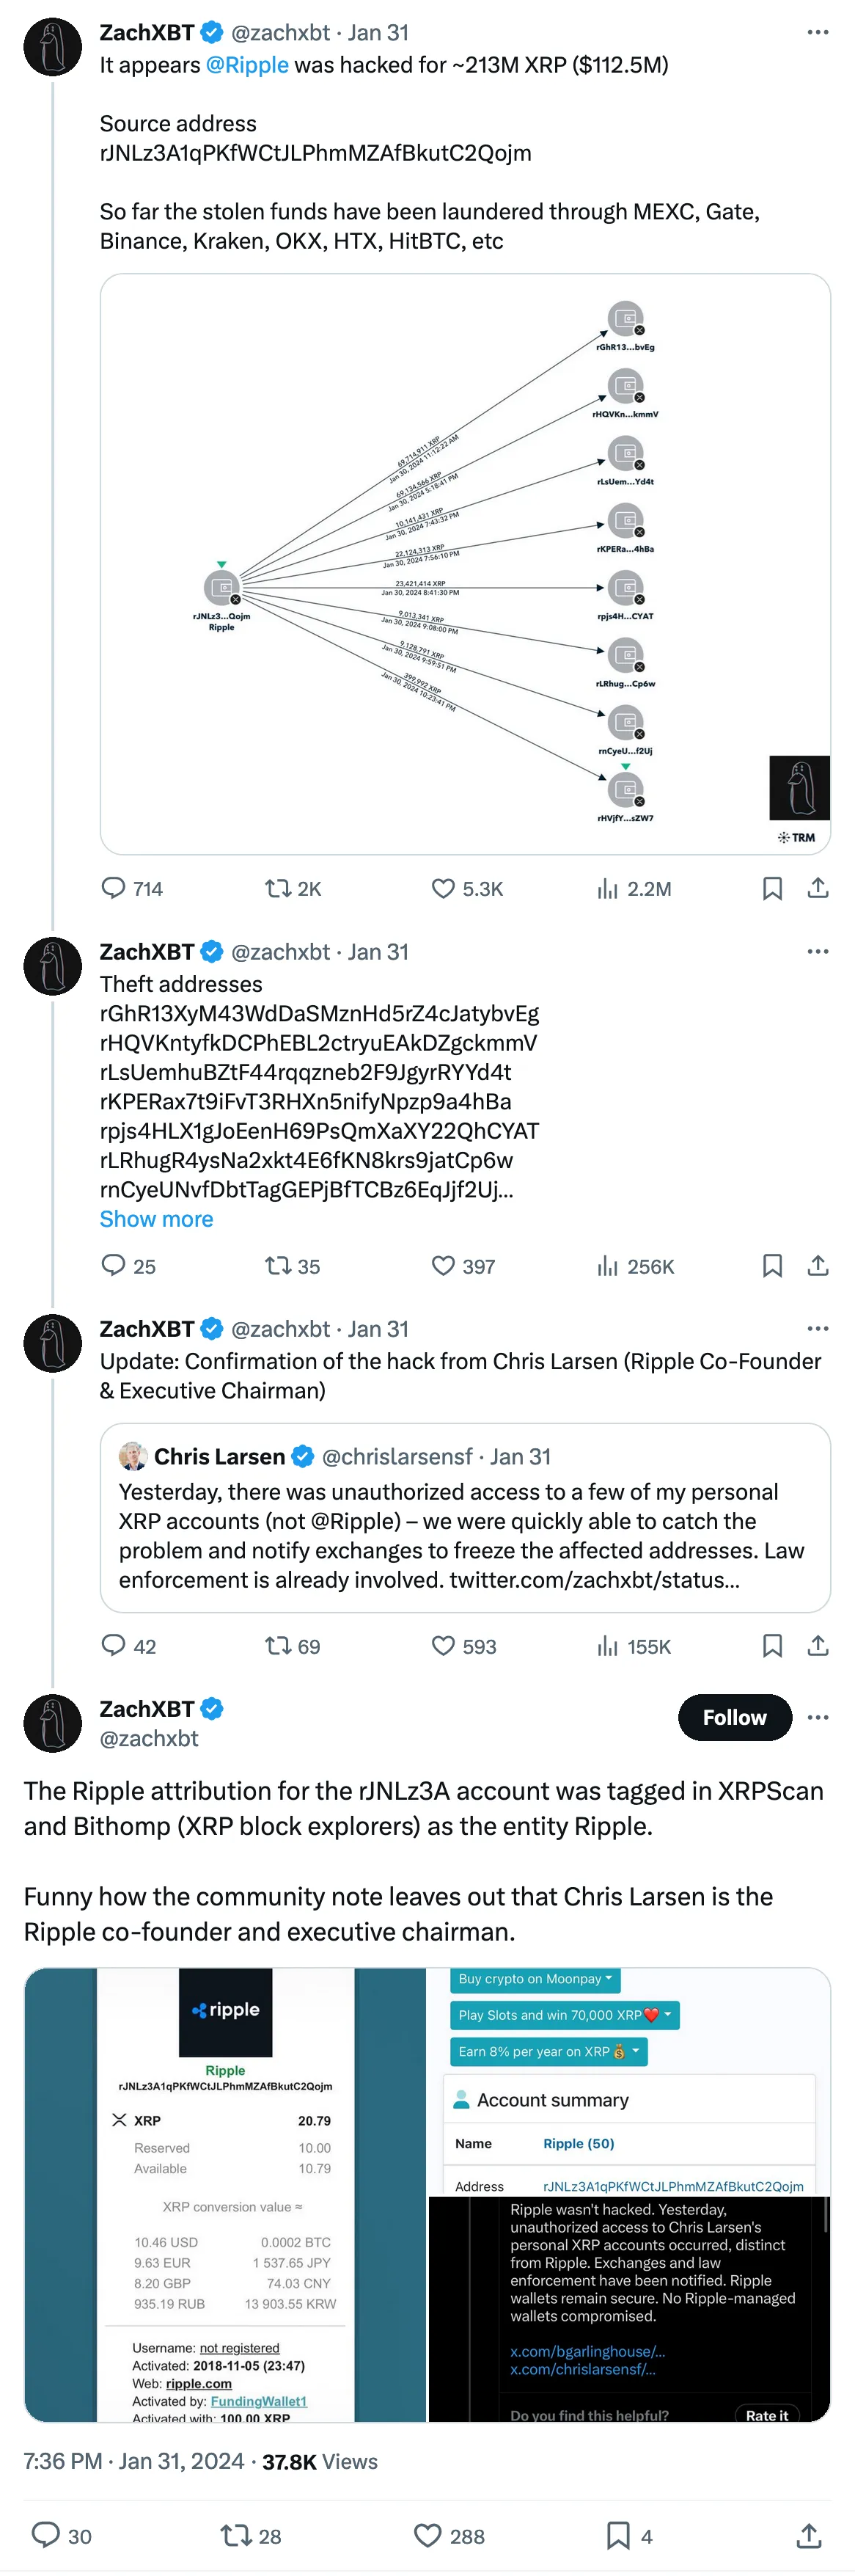 It appears 
@Ripple
 was hacked for ~213M XRP ($112.5M)

Source address
rJNLz3A1qPKfWCtJLPhmMZAfBkutC2Qojm

So far the stolen funds have been laundered through MEXC, Gate, Binance, Kraken, OKX, HTX, HitBTC, etc 
Tweeted at 9:05 AM · Jan 31, 2024

Theft addresses
rGhR13XyM43WdDaSMznHd5rZ4cJatybvEg
rHQVKntyfkDCPhEBL2ctryuEAkDZgckmmV
rLsUemhuBZtF44rqqzneb2F9JgyrRYYd4t
rKPERax7t9iFvT3RHXn5nifyNpzp9a4hBa
rpjs4HLX1gJoEenH69PsQmXaXY22QhCYAT
rLRhugR4ysNa2xkt4E6fKN8krs9jatCp6w
rnCyeUNvfDbtTagGEPjBfTCBz6EqJjf2Uj… 
Tweeted at Jan 31

Update: Confirmation of the hack from Chris Larsen (Ripple Co-Founder & Executive Chairman) 
Tweeted at Jan 31

The Ripple attribution for the rJNLz3A account was tagged in XRPScan and Bithomp (XRP block explorers) as the entity Ripple. 

Funny how the community note leaves out that Chris Larsen is the Ripple co-founder and executive chairman. 
Tweeted at 15h